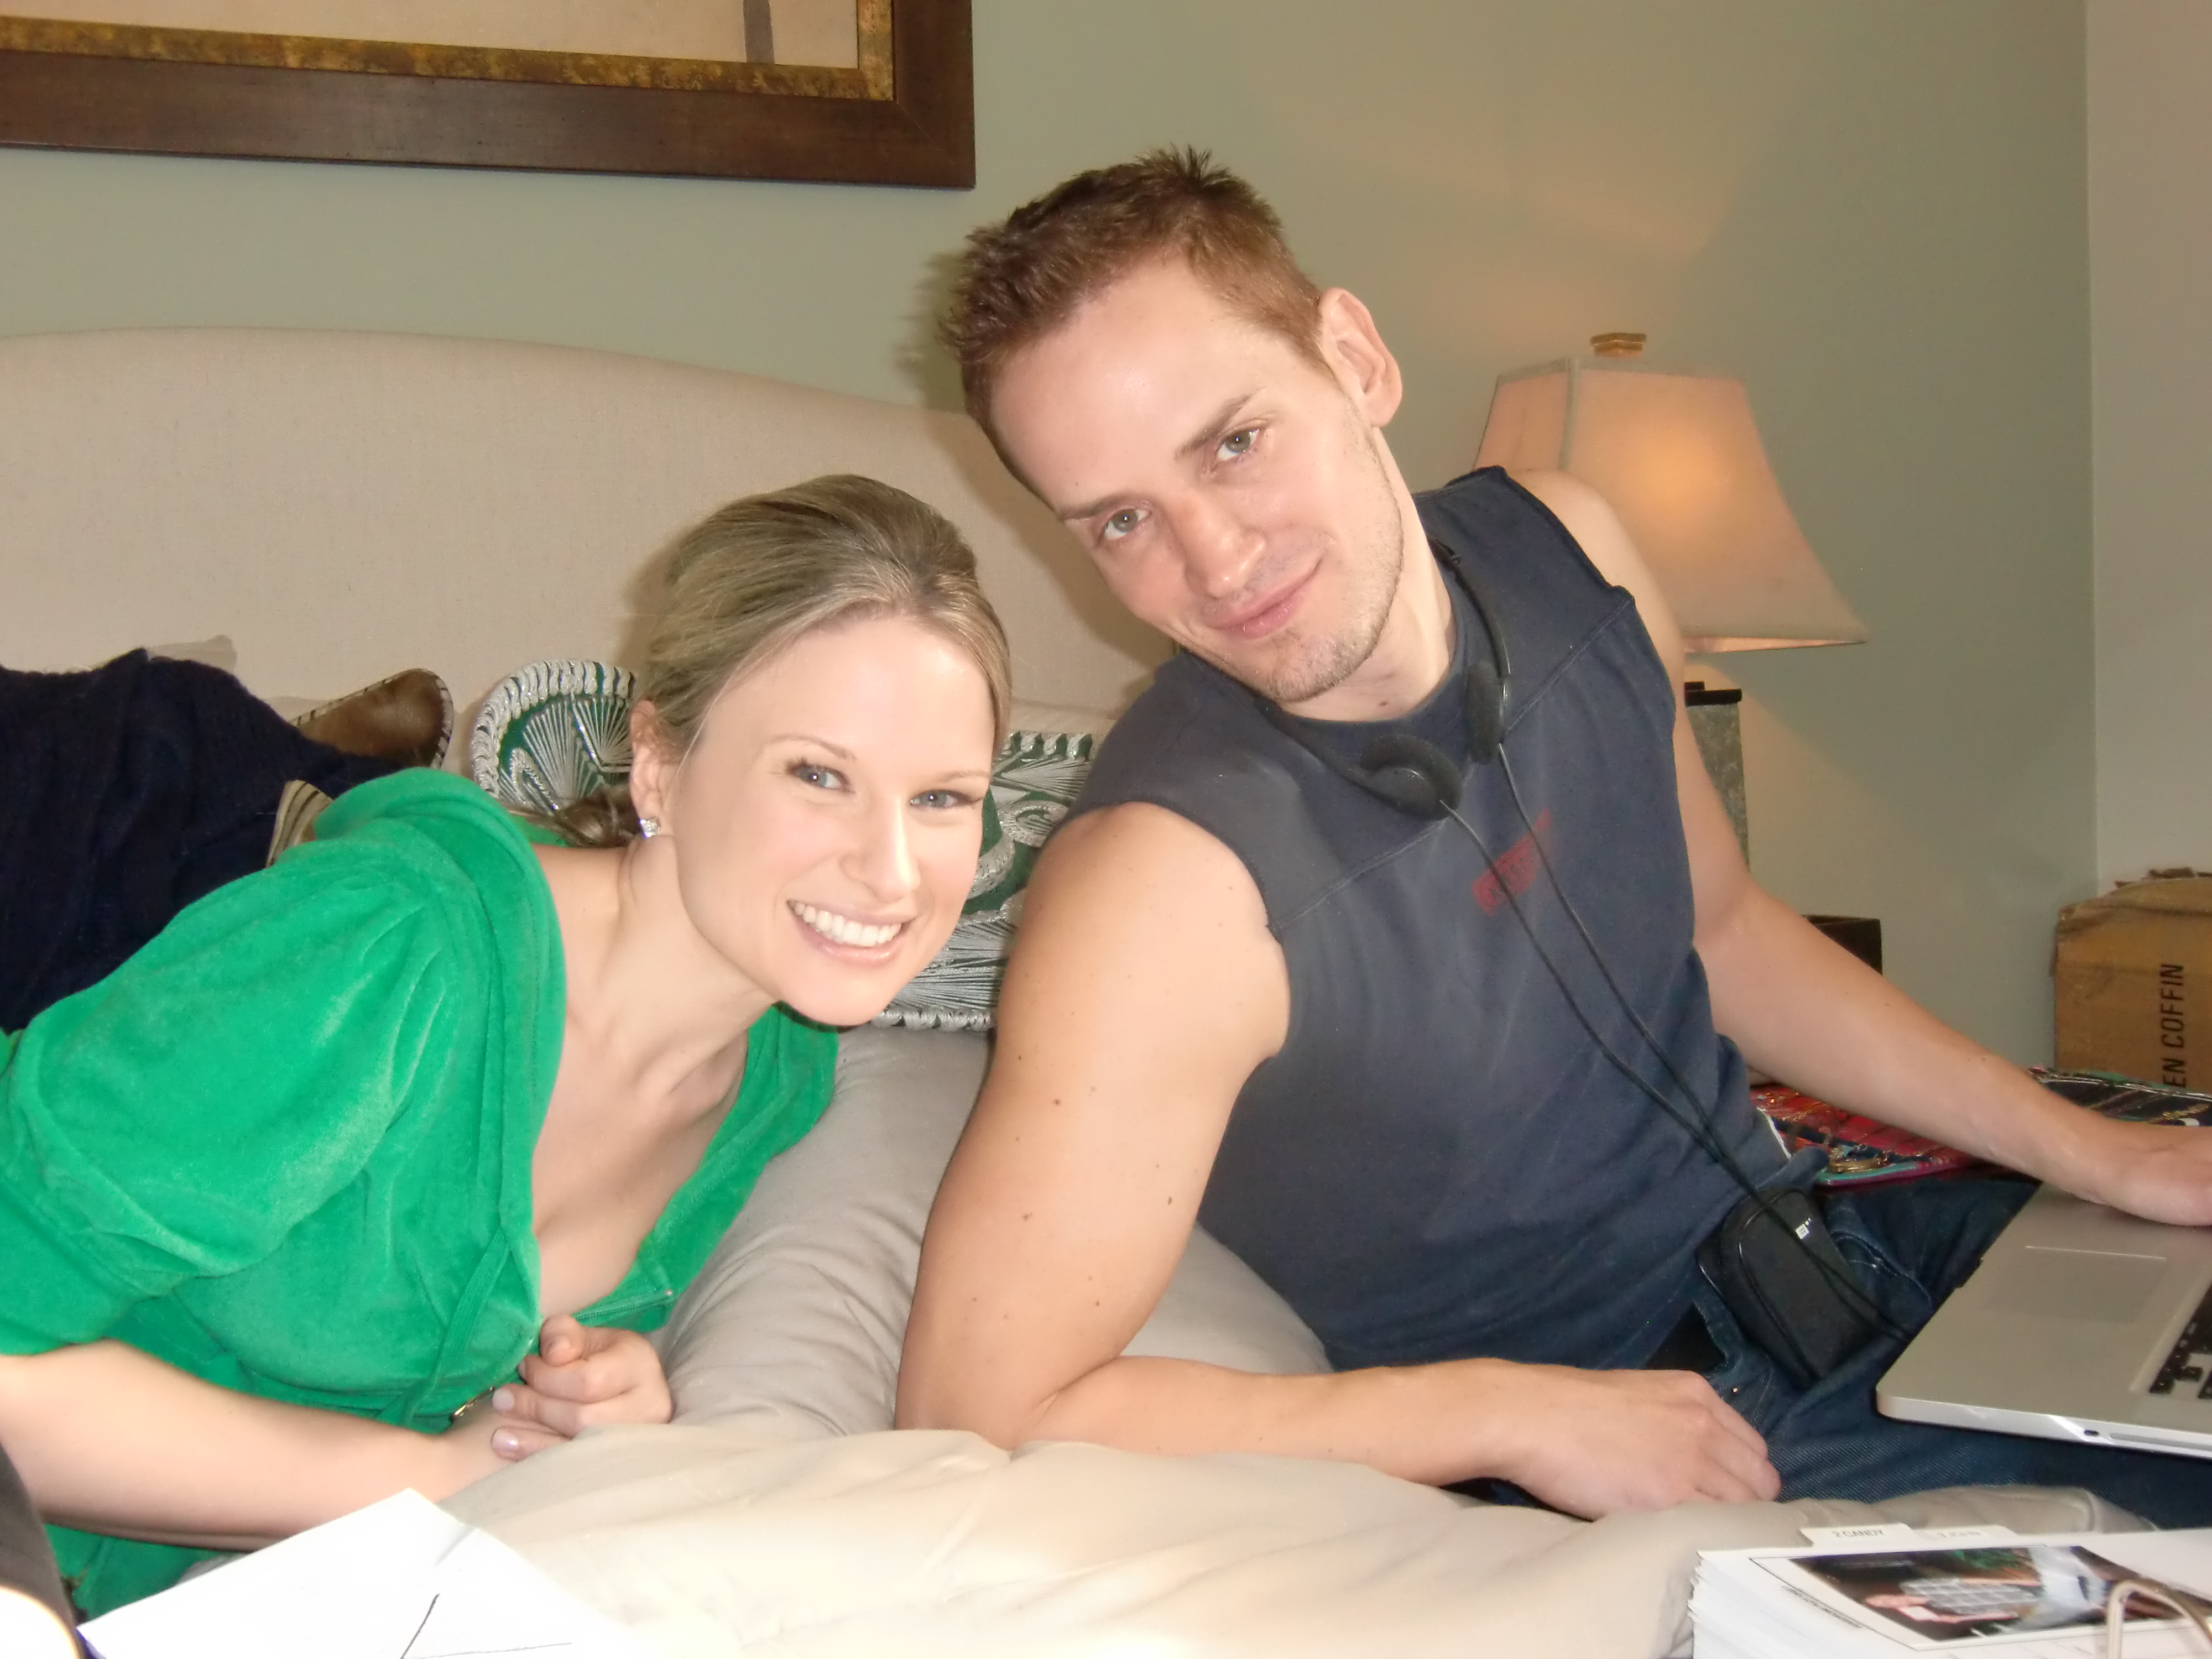 Allison Lane (Candy) and director Casper Andreas on the set of 